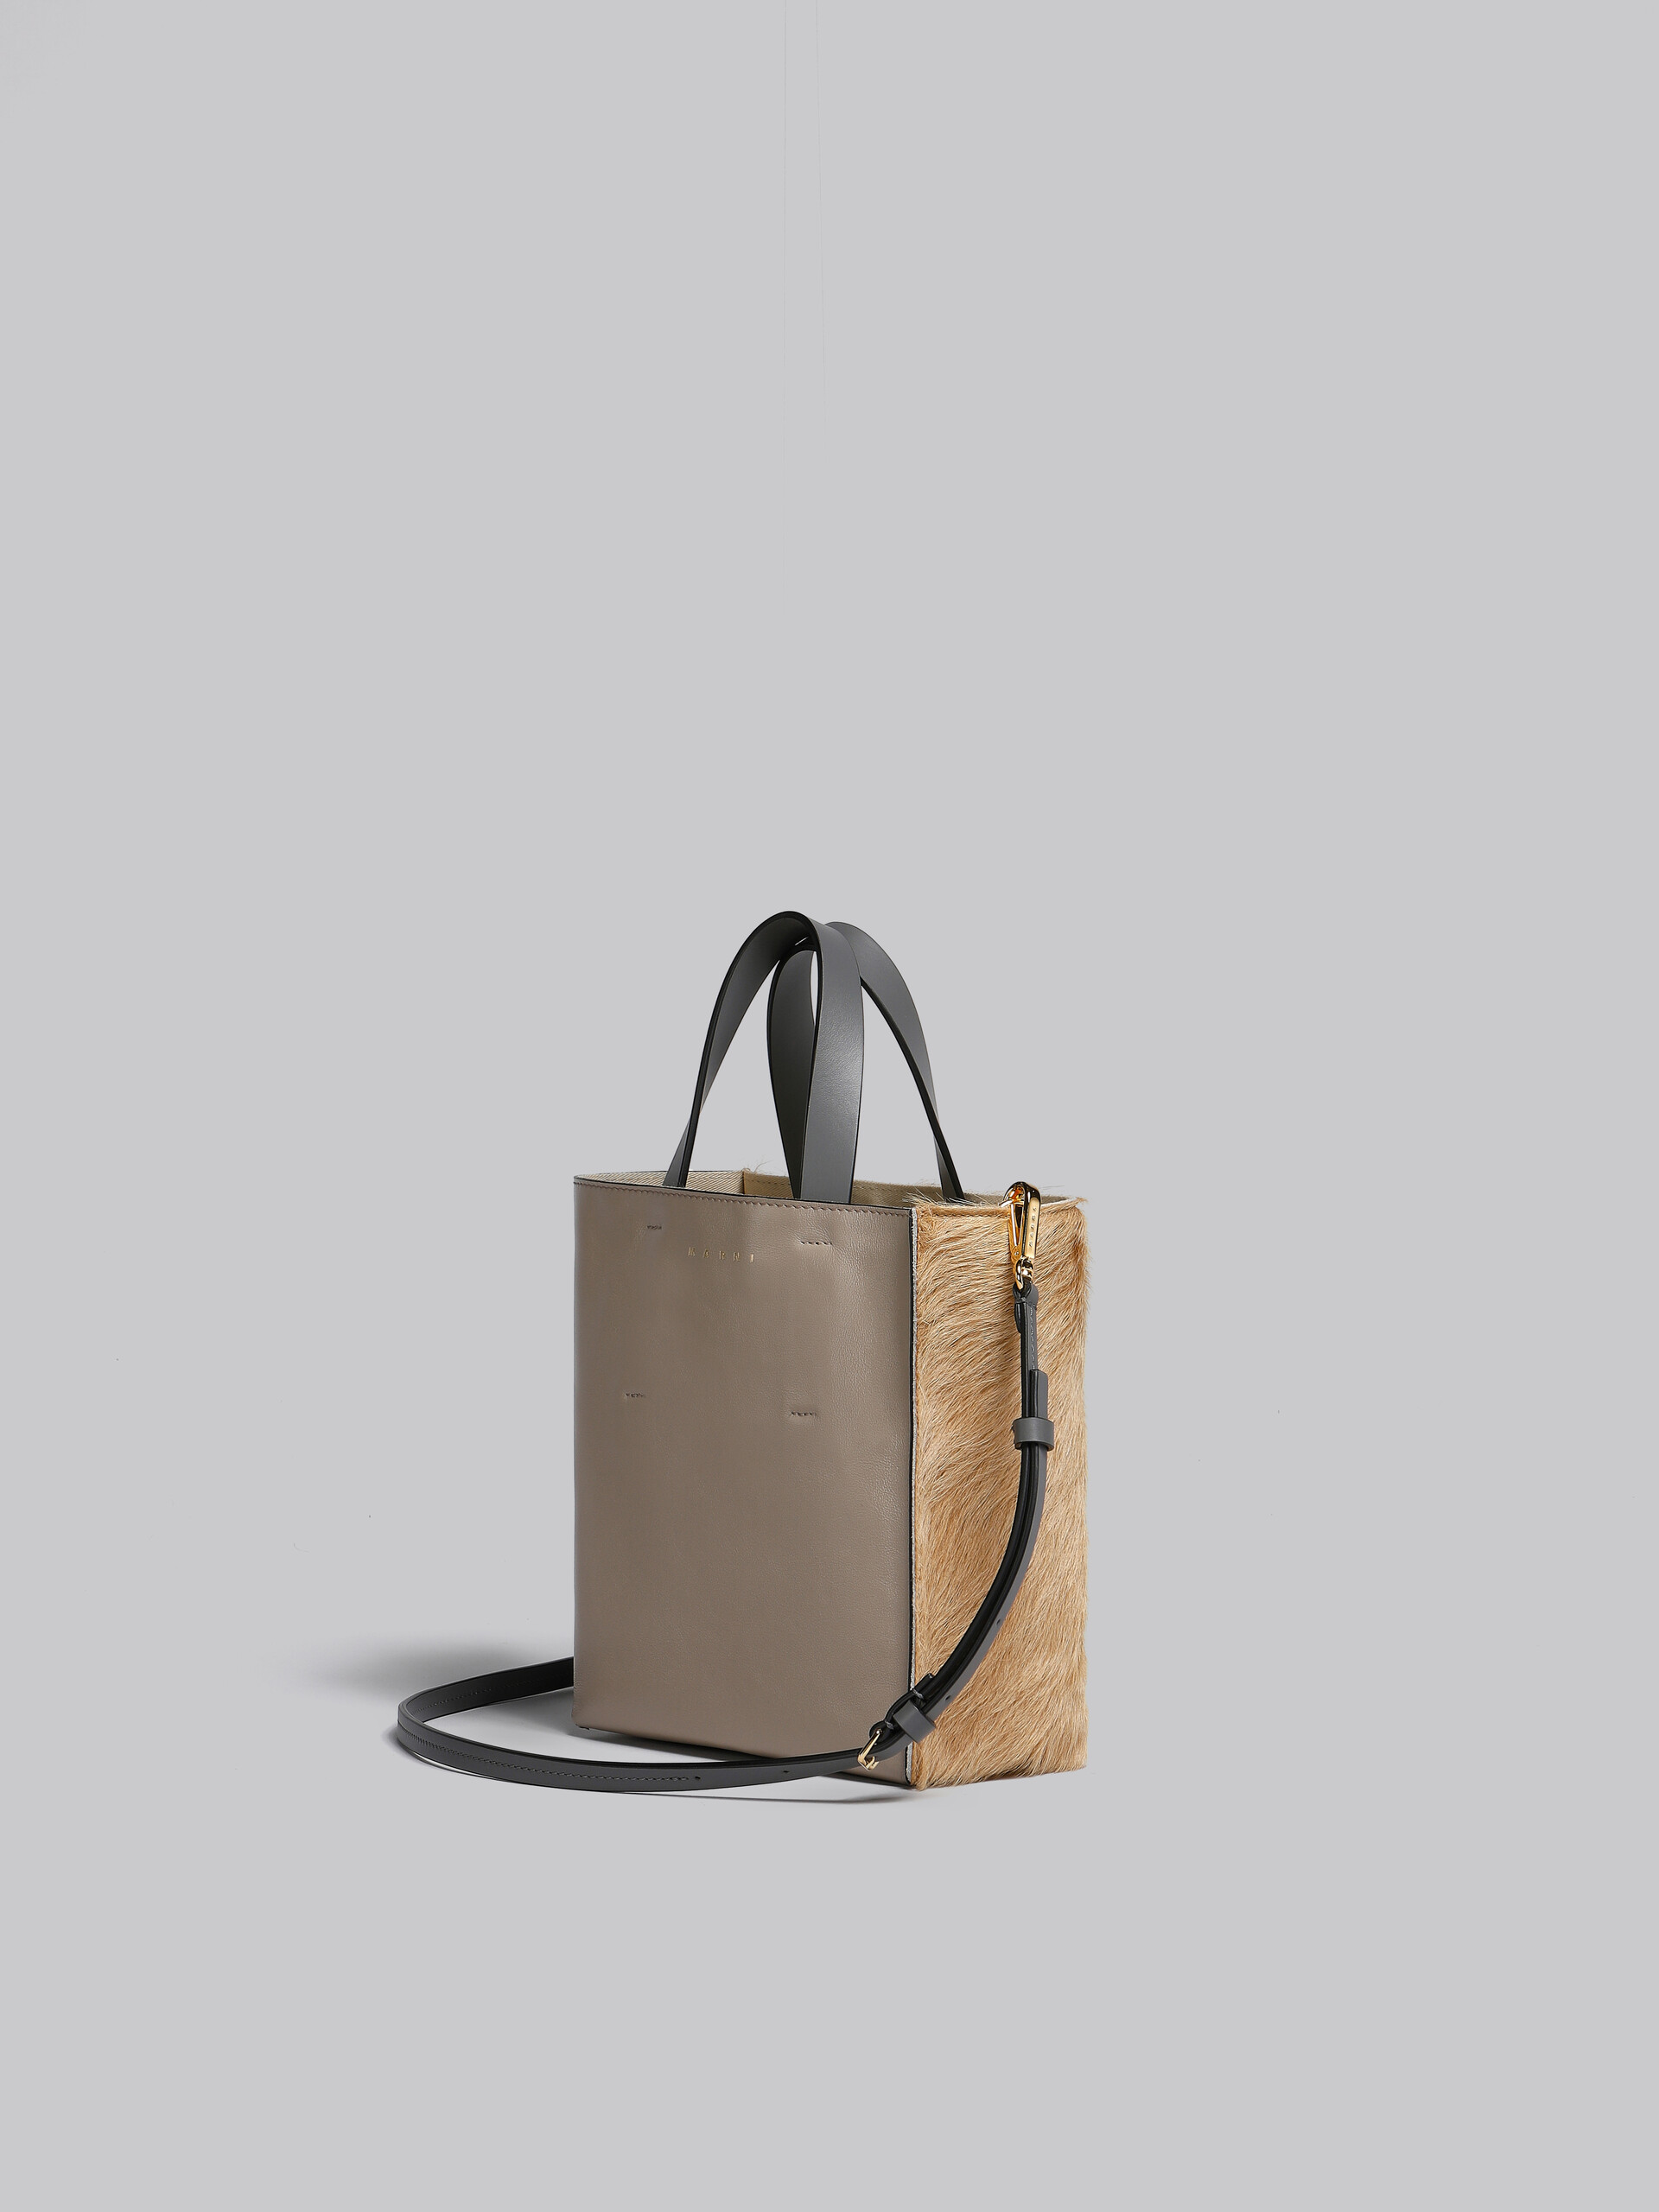 Museo Soft Mini Bag in light brown beige and grey long-hair calfskin - Shopping Bags - Image 3